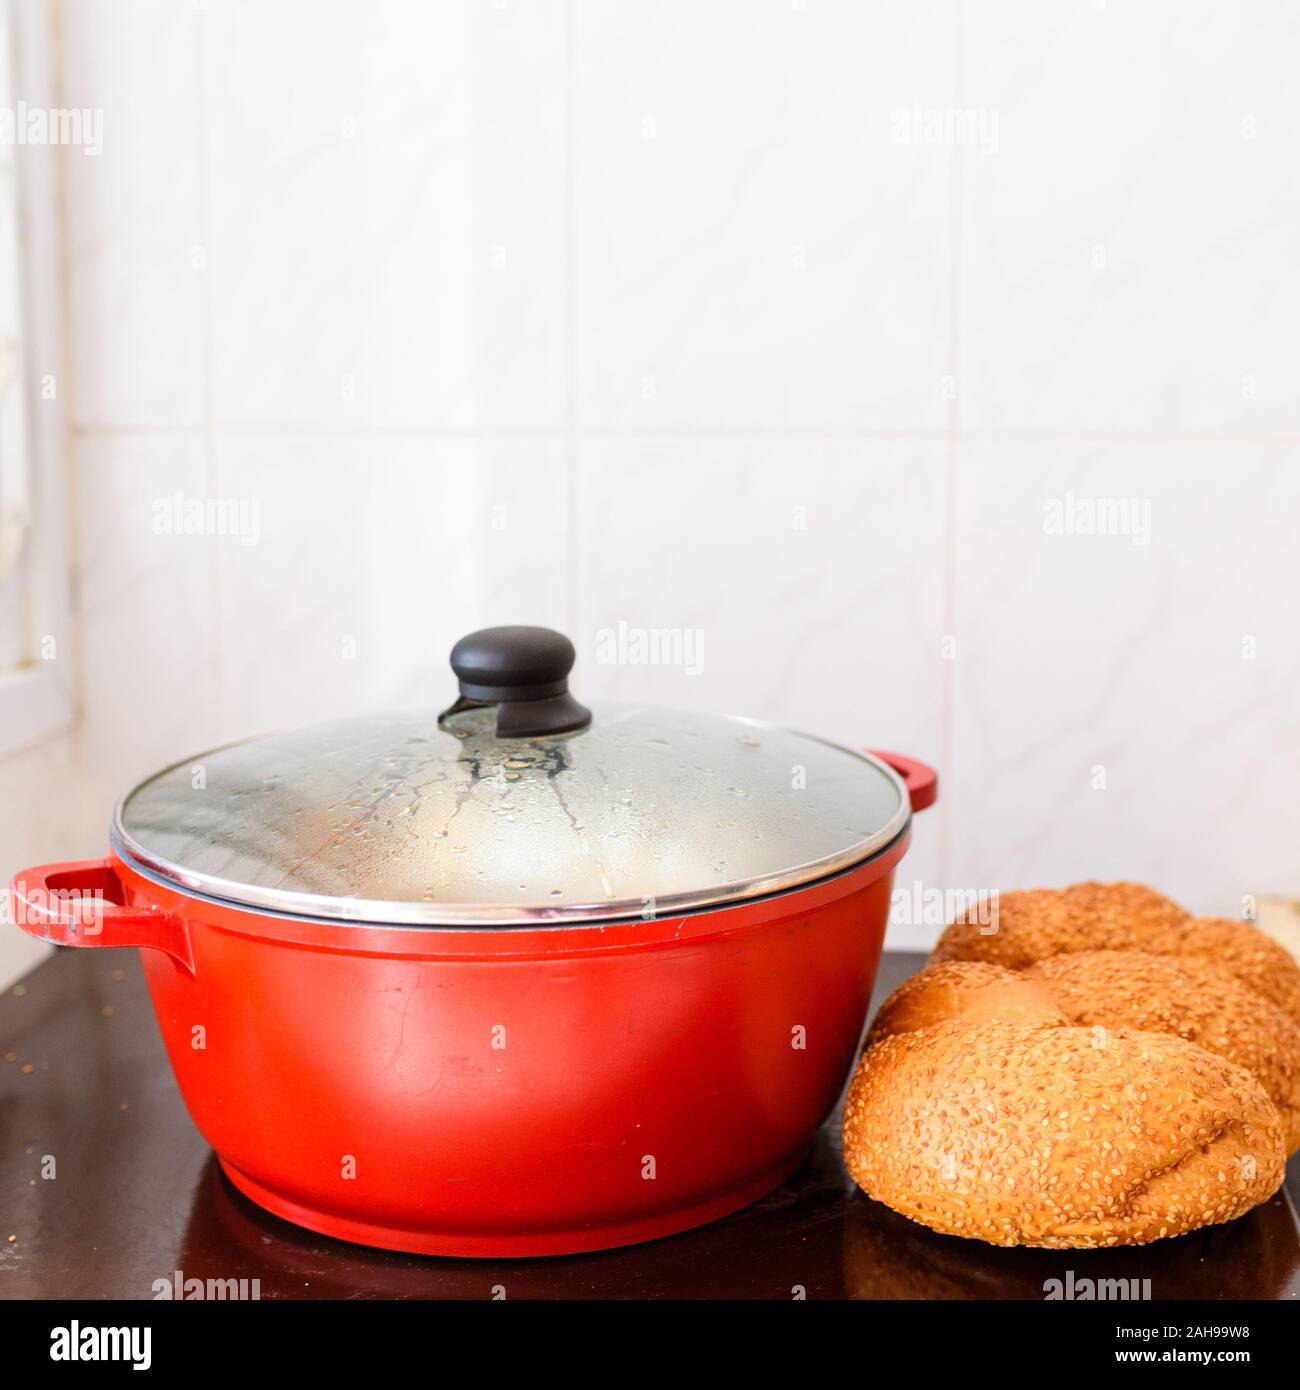 https://c8.alamy.com/comp/2AH99W8/hot-plate-for-the-sabbath-pot-with-traditional-food-and-challah-special-bread-in-jewish-cuisine-traditional-food-jewish-shabbat-2AH99W8.jpg